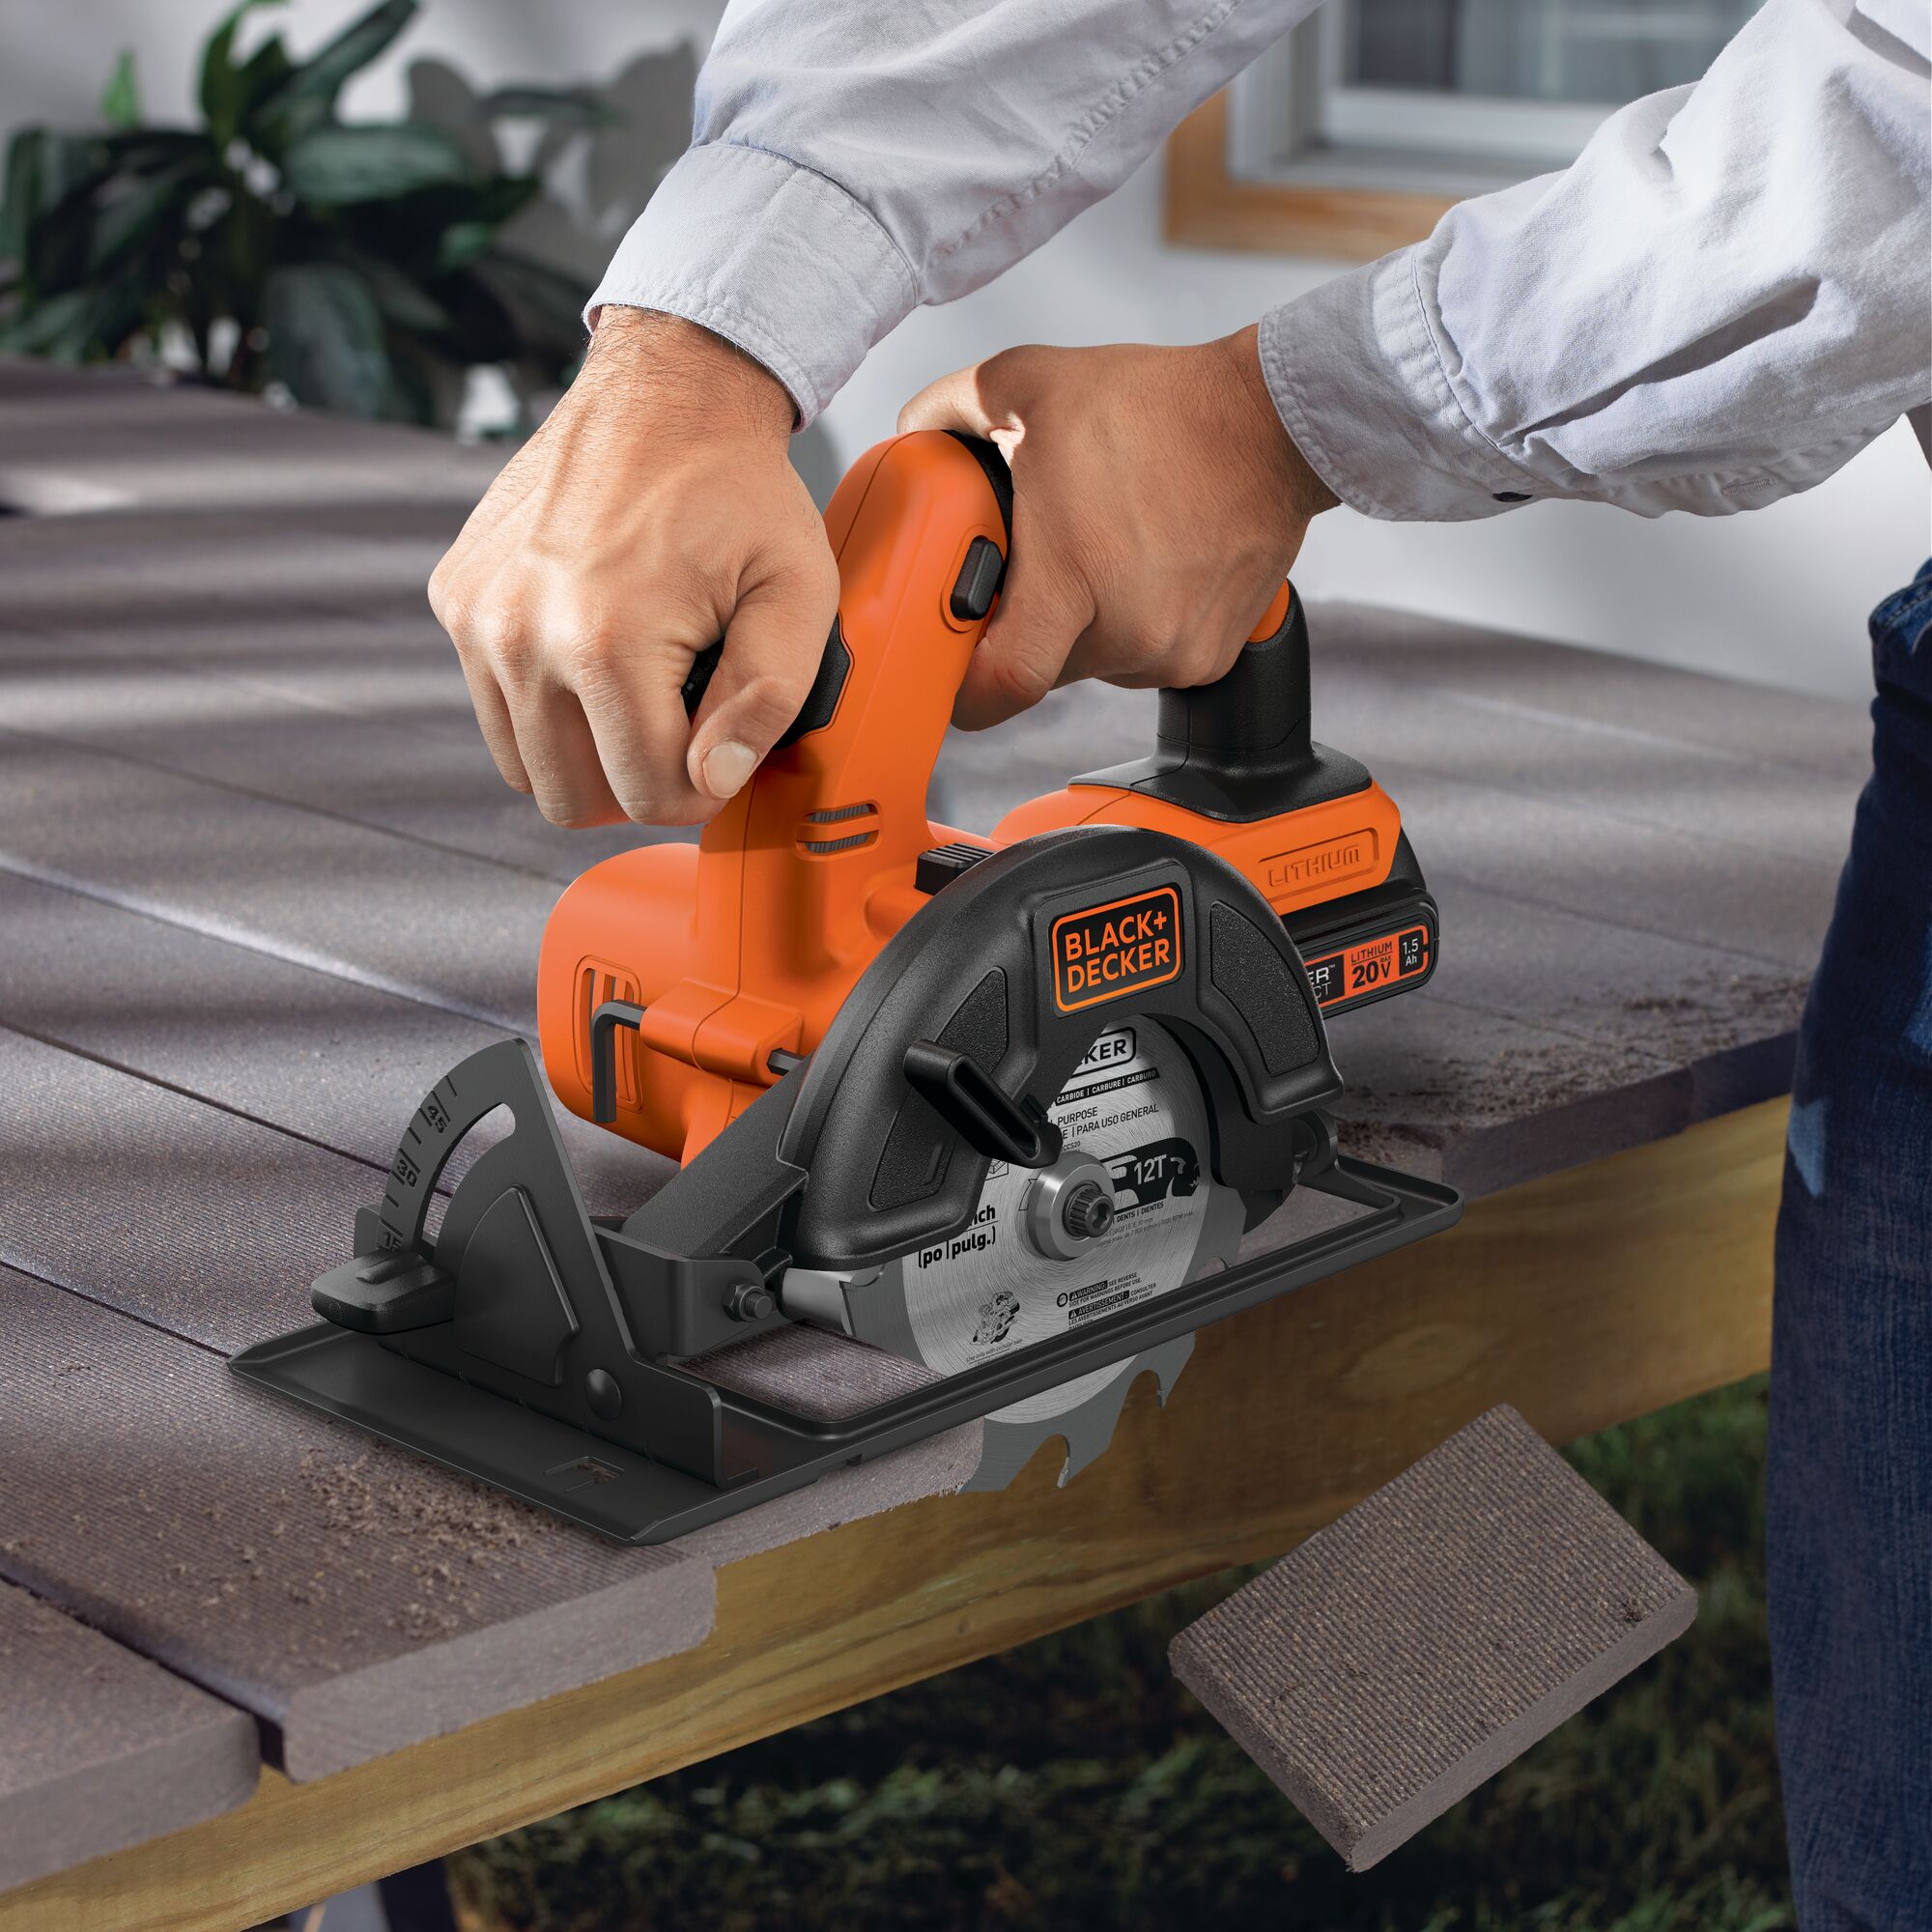 20 volt MAX 5 and half inch circular saw being used by a person to cut hard material.